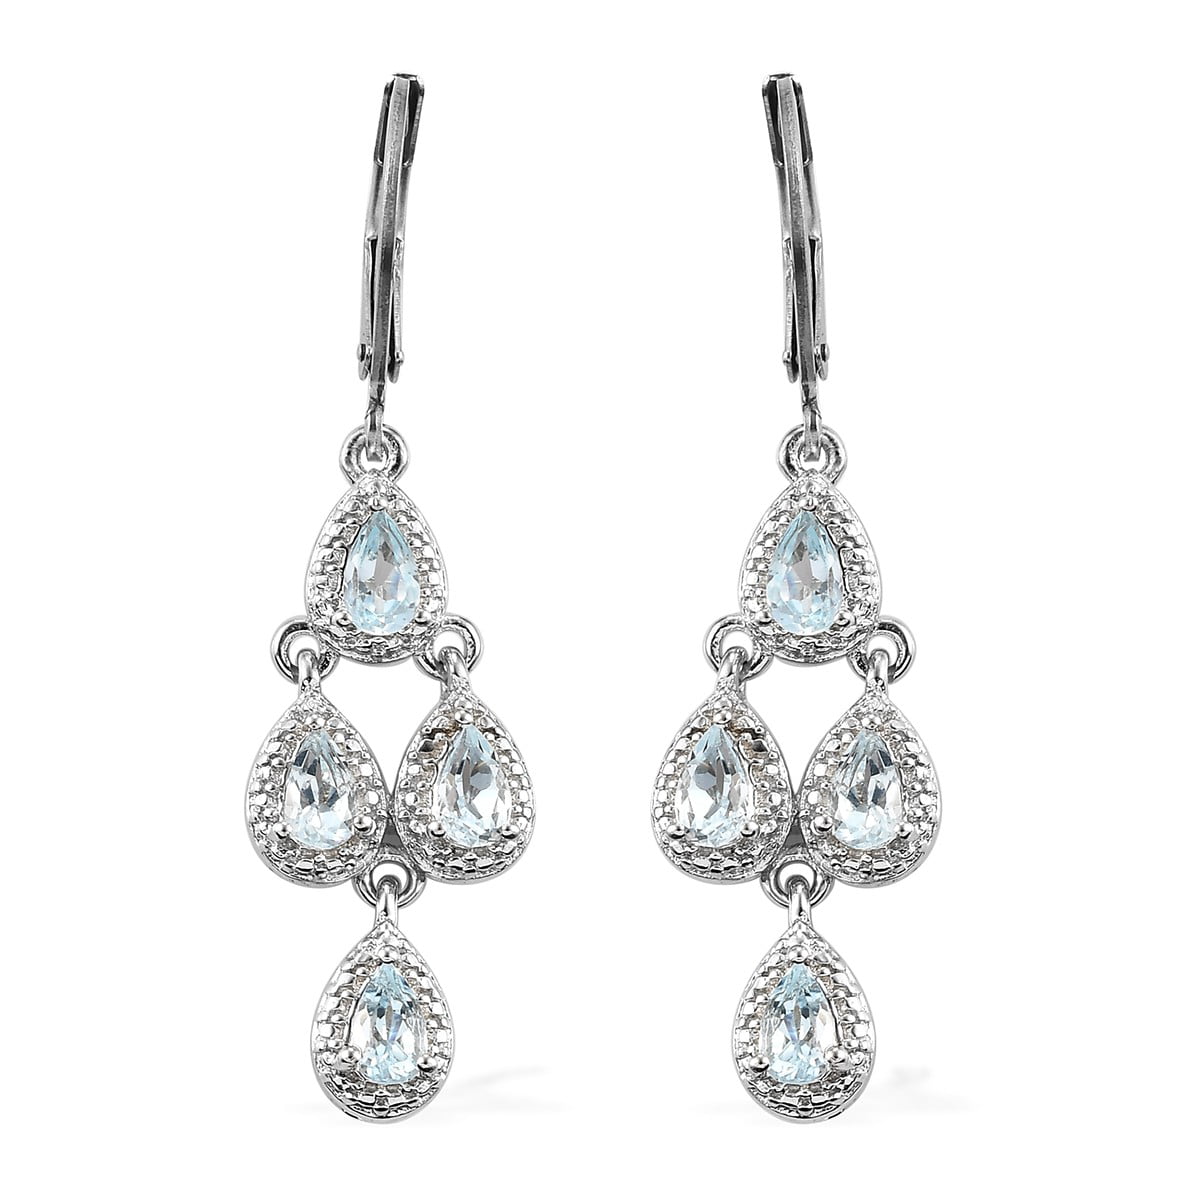 Earrings Vintage Blue Givre Triple DiamondBrass Dangles with Gold-Filled Leverback Earrings Set with Round Blue Topaz Cubic Zirconias